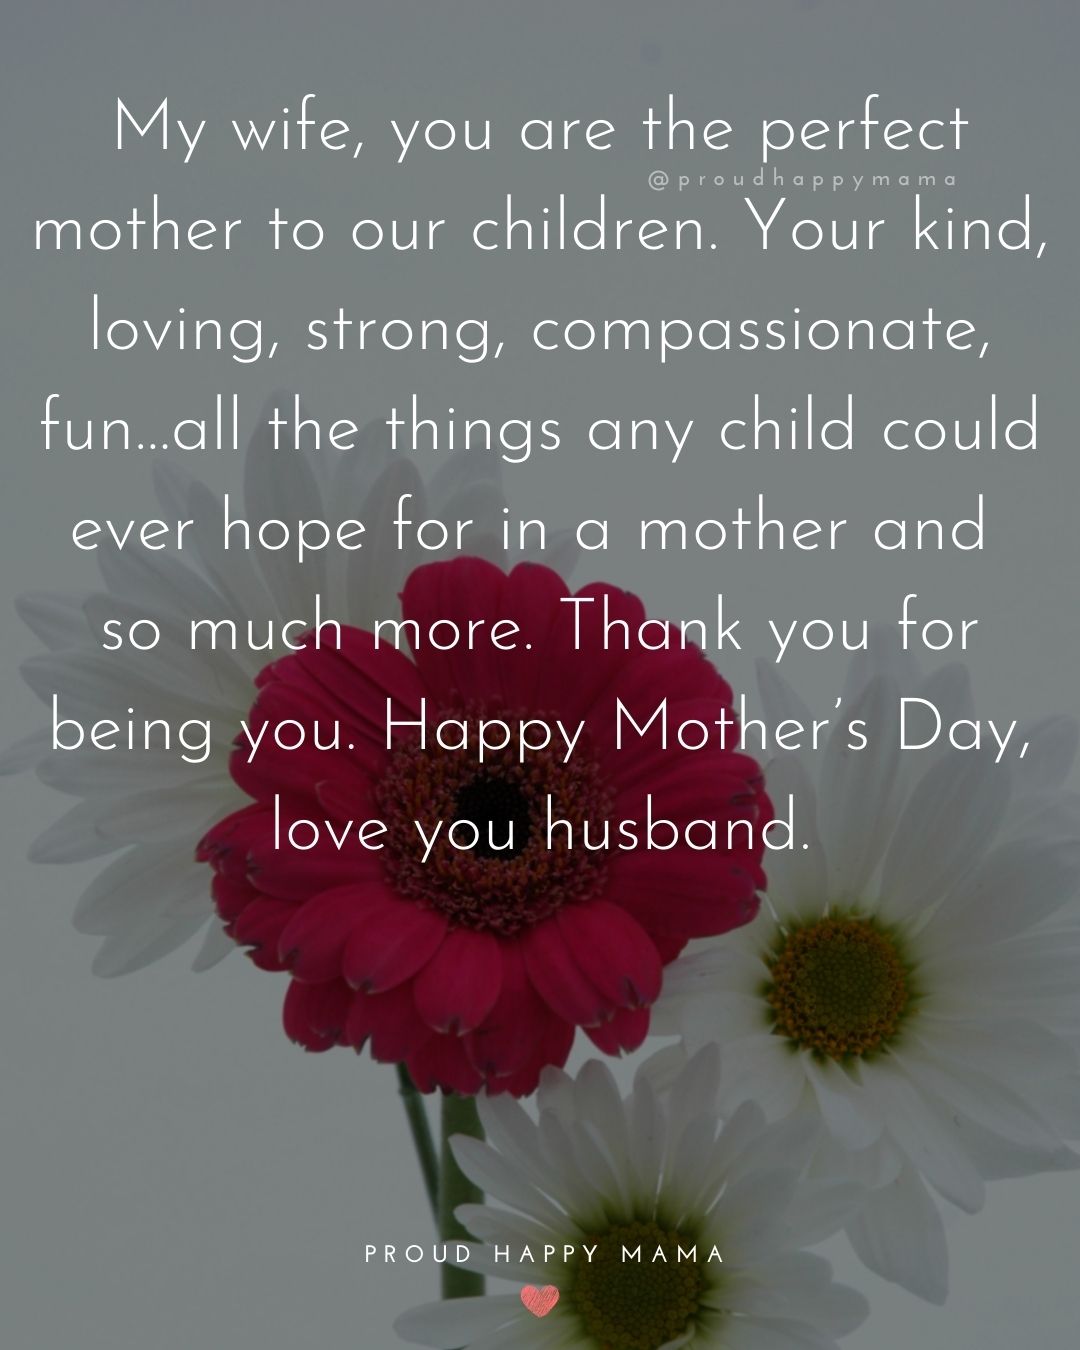 happy mothers day quotes from husband to wife